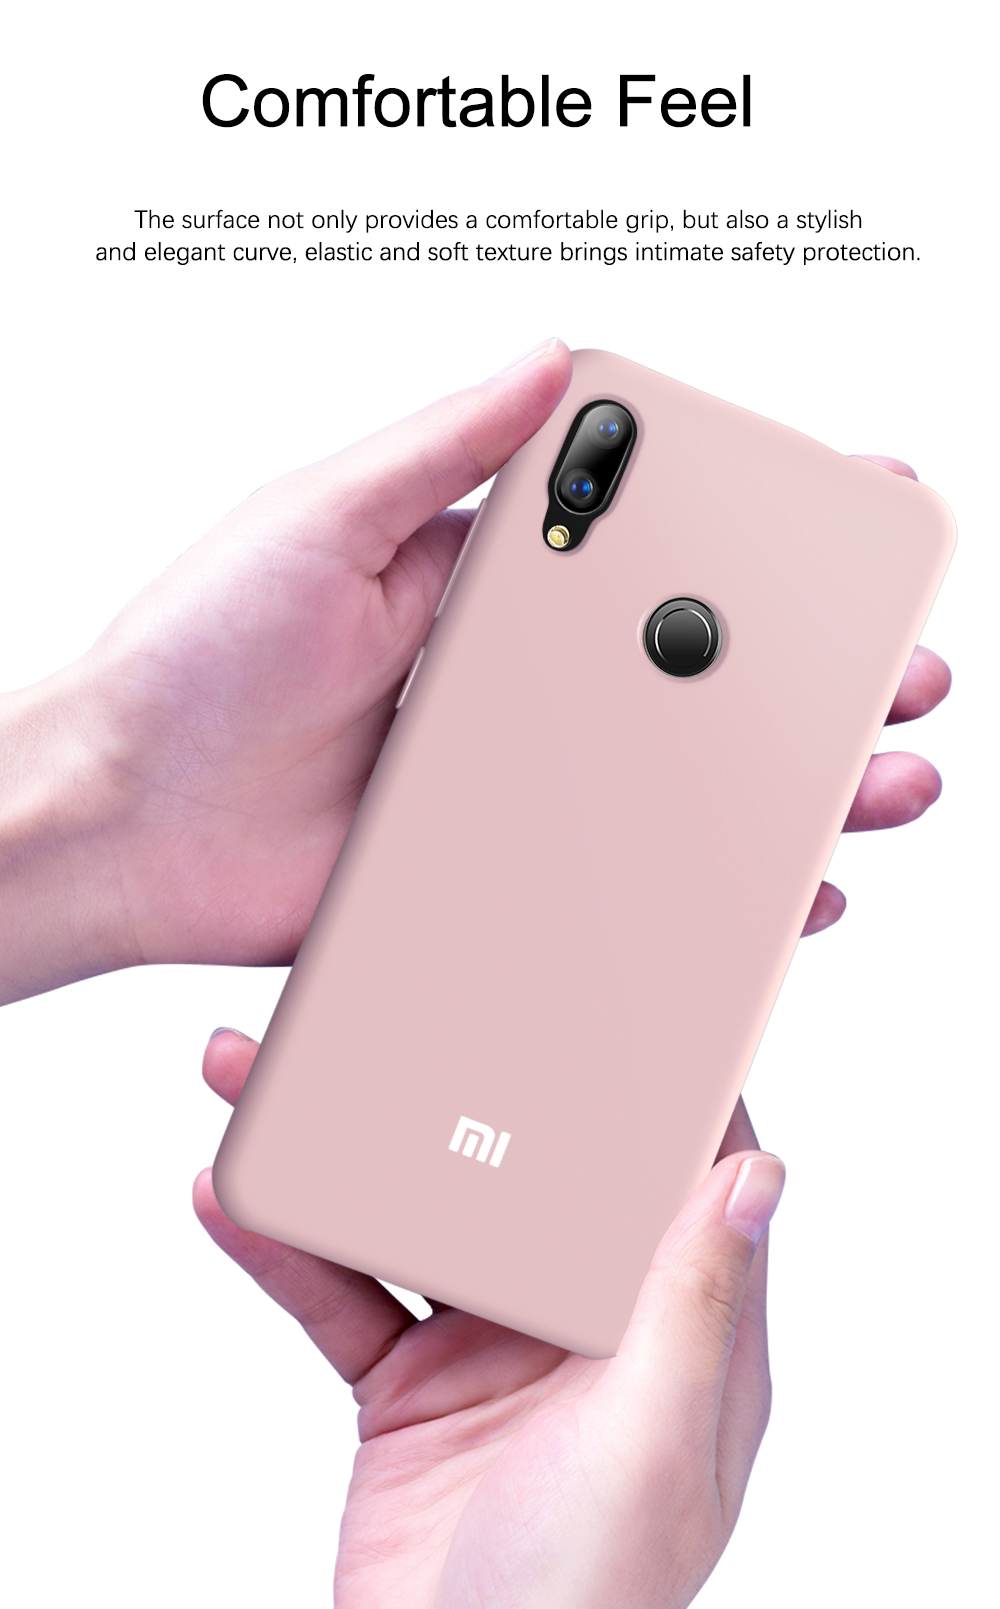 Bakeey-Ultra-Thin-Anti-Scratch-Liquid-Silicone-Soft-Protective-Case-For-Xiaomi-Redmi-7-1562660-2